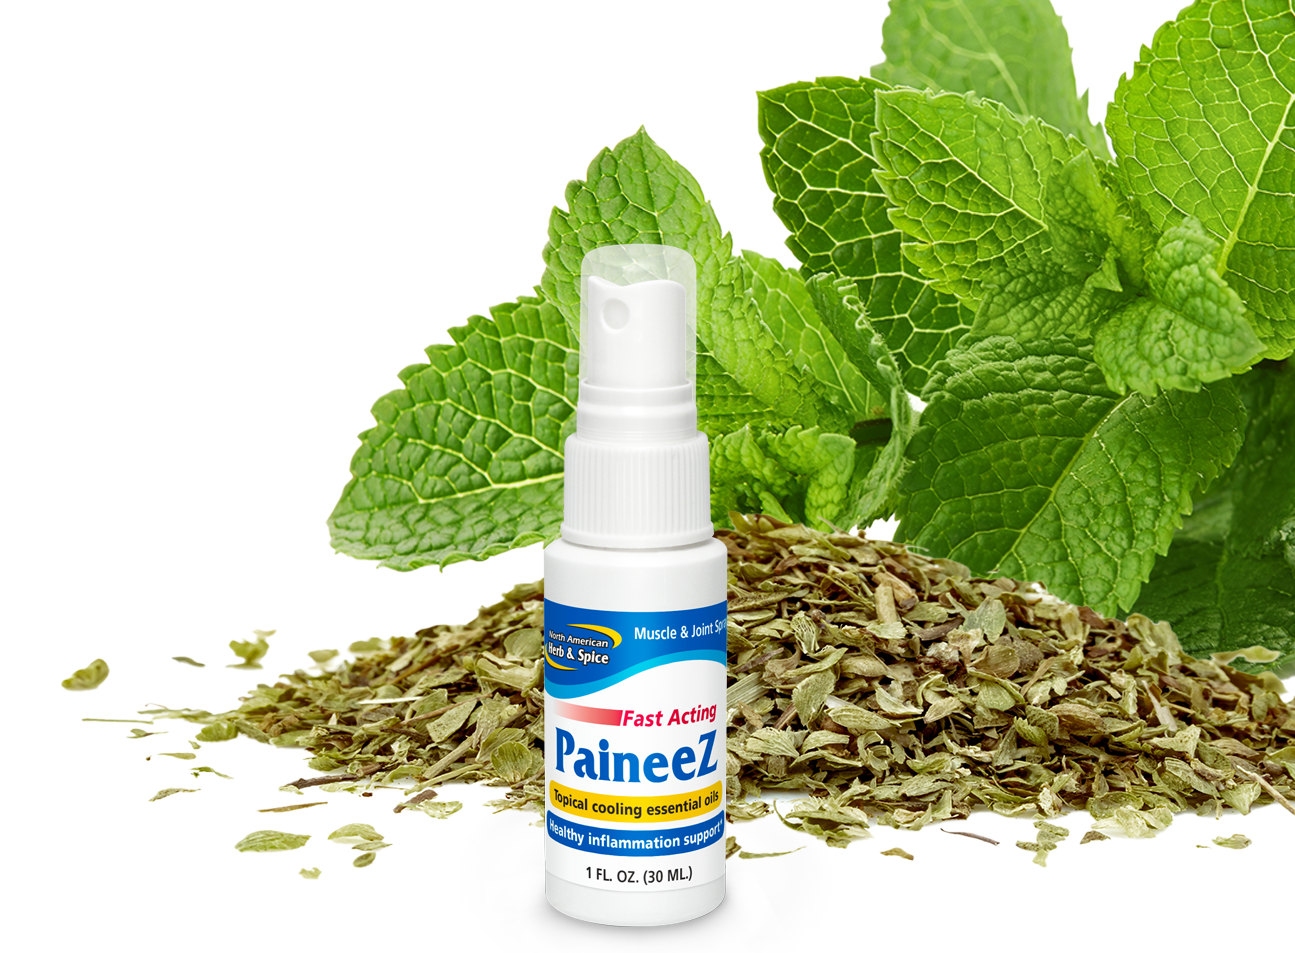 Mint ingredient with Paineez product